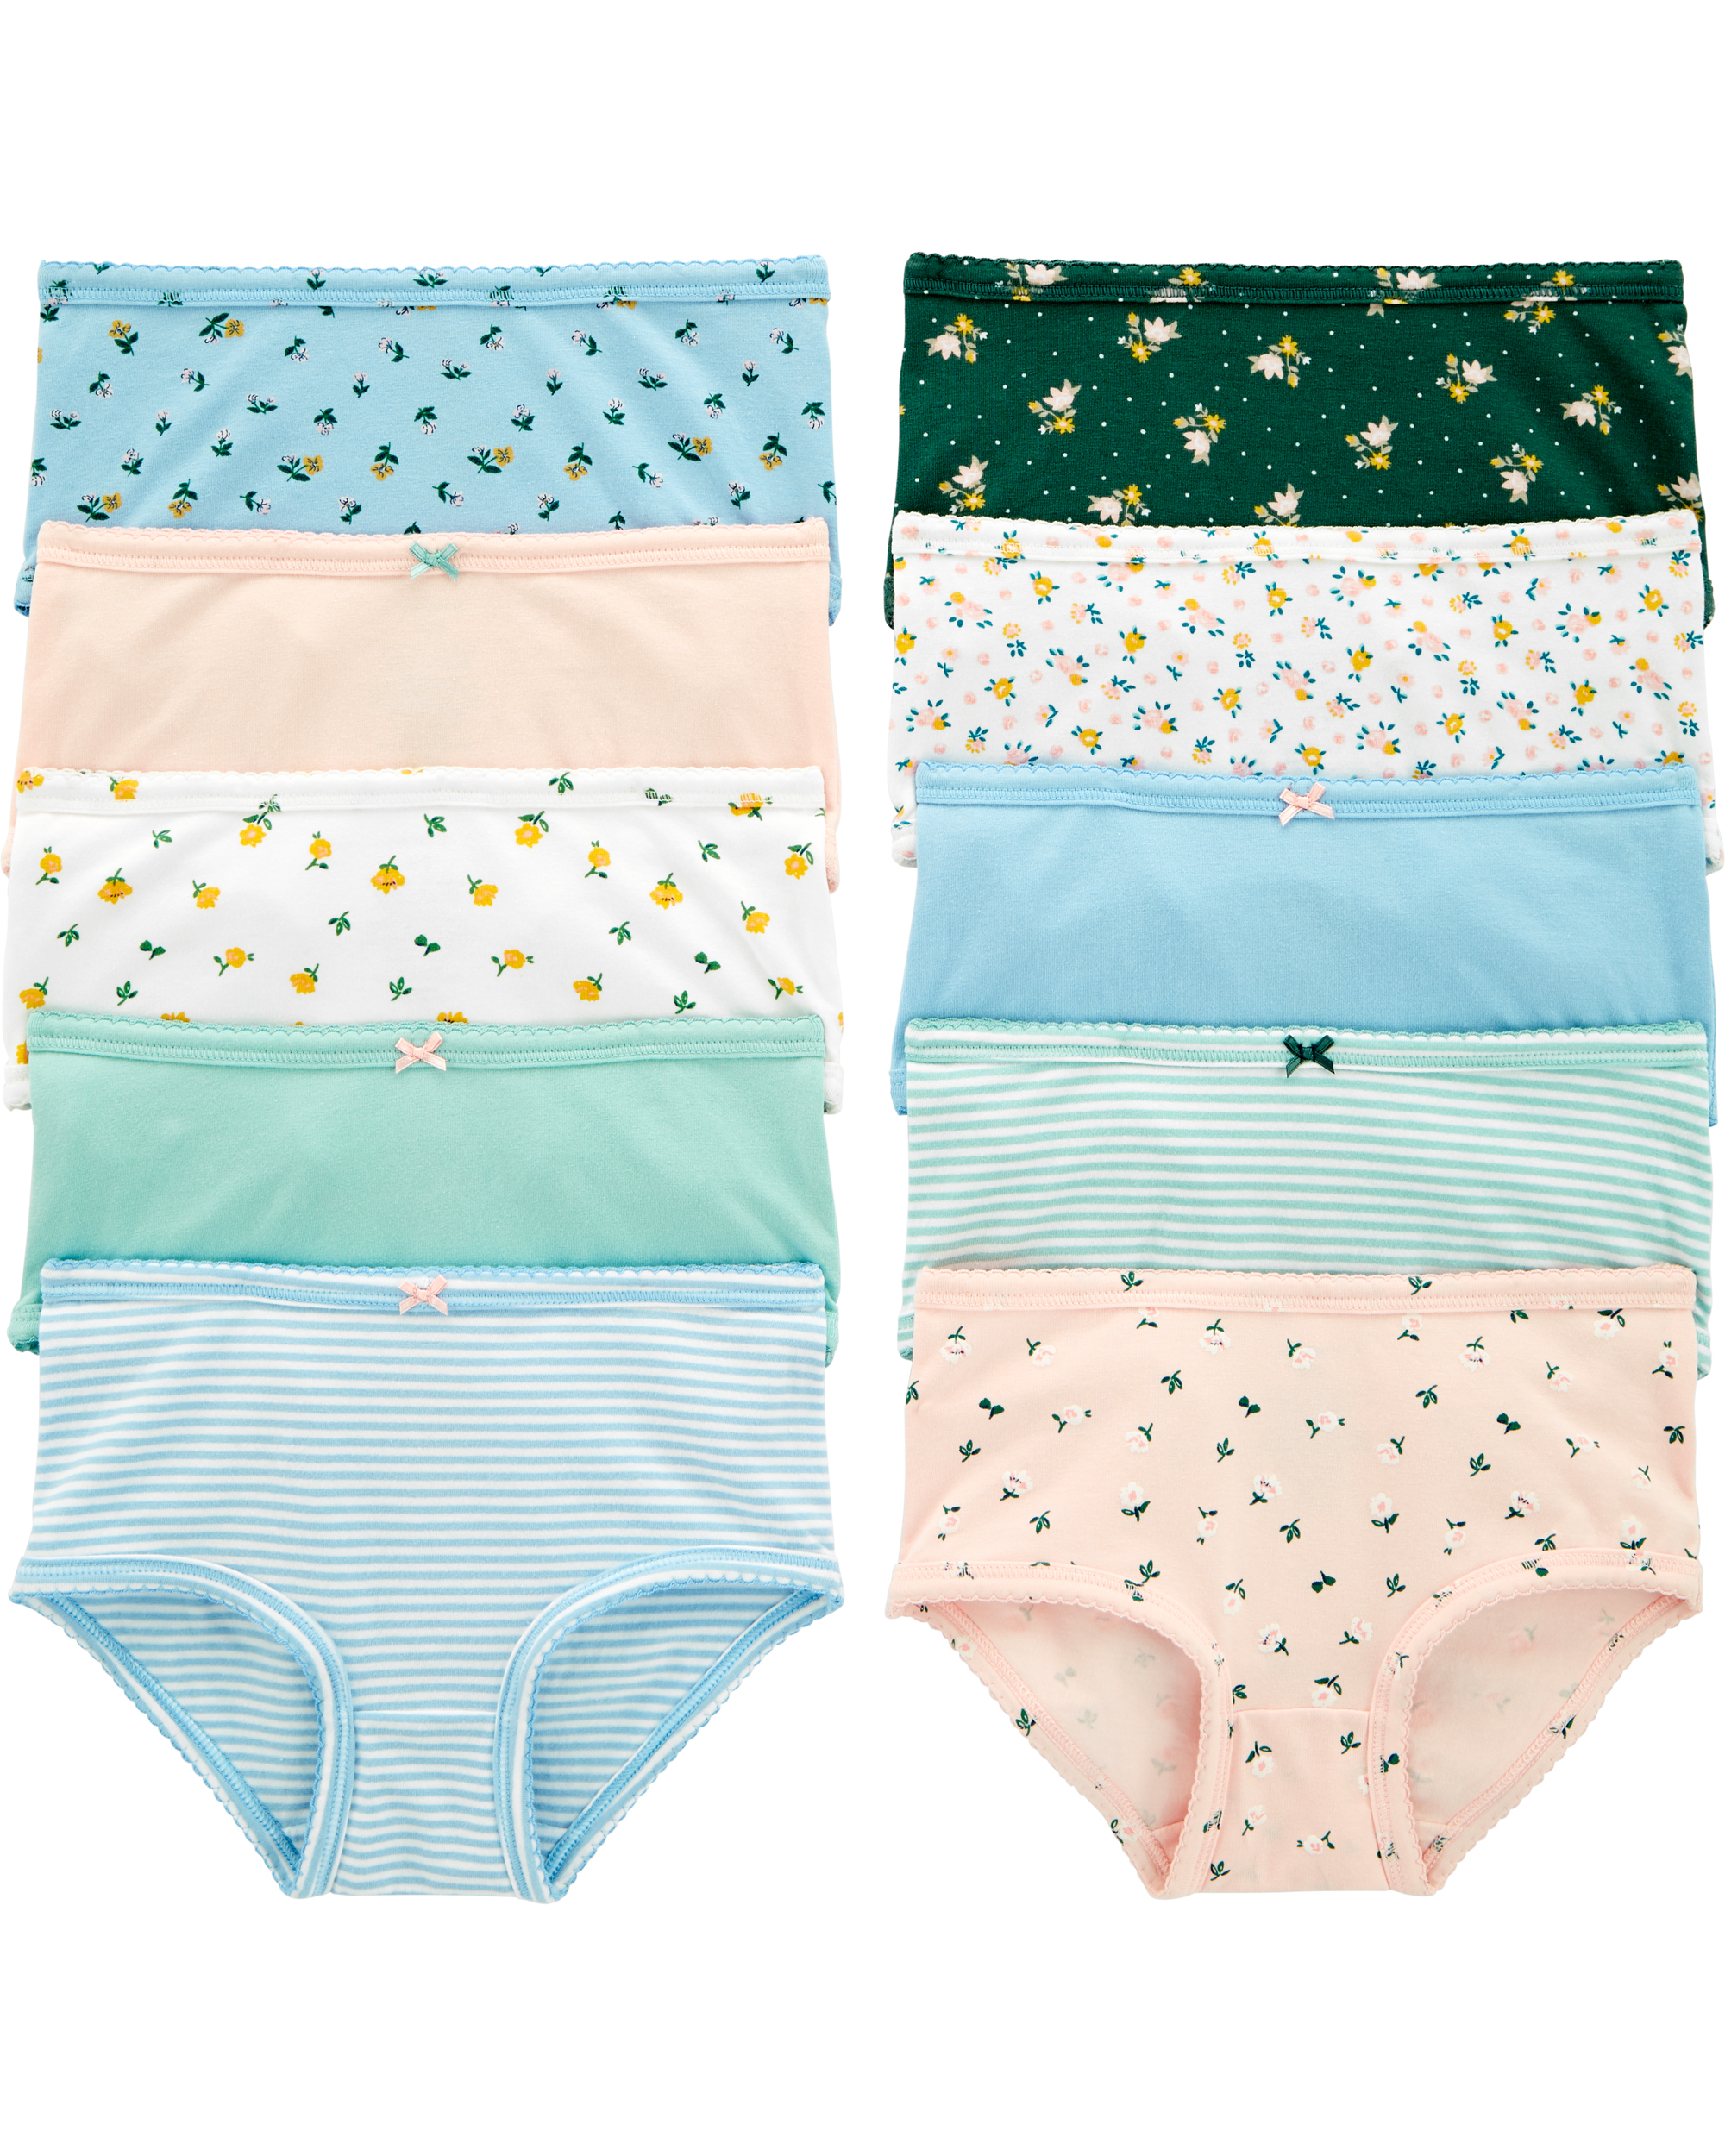 Baby Underwear Girls Briefs Young Children Candy Colors Cotton Flower Side  Big Size Cute Panties High